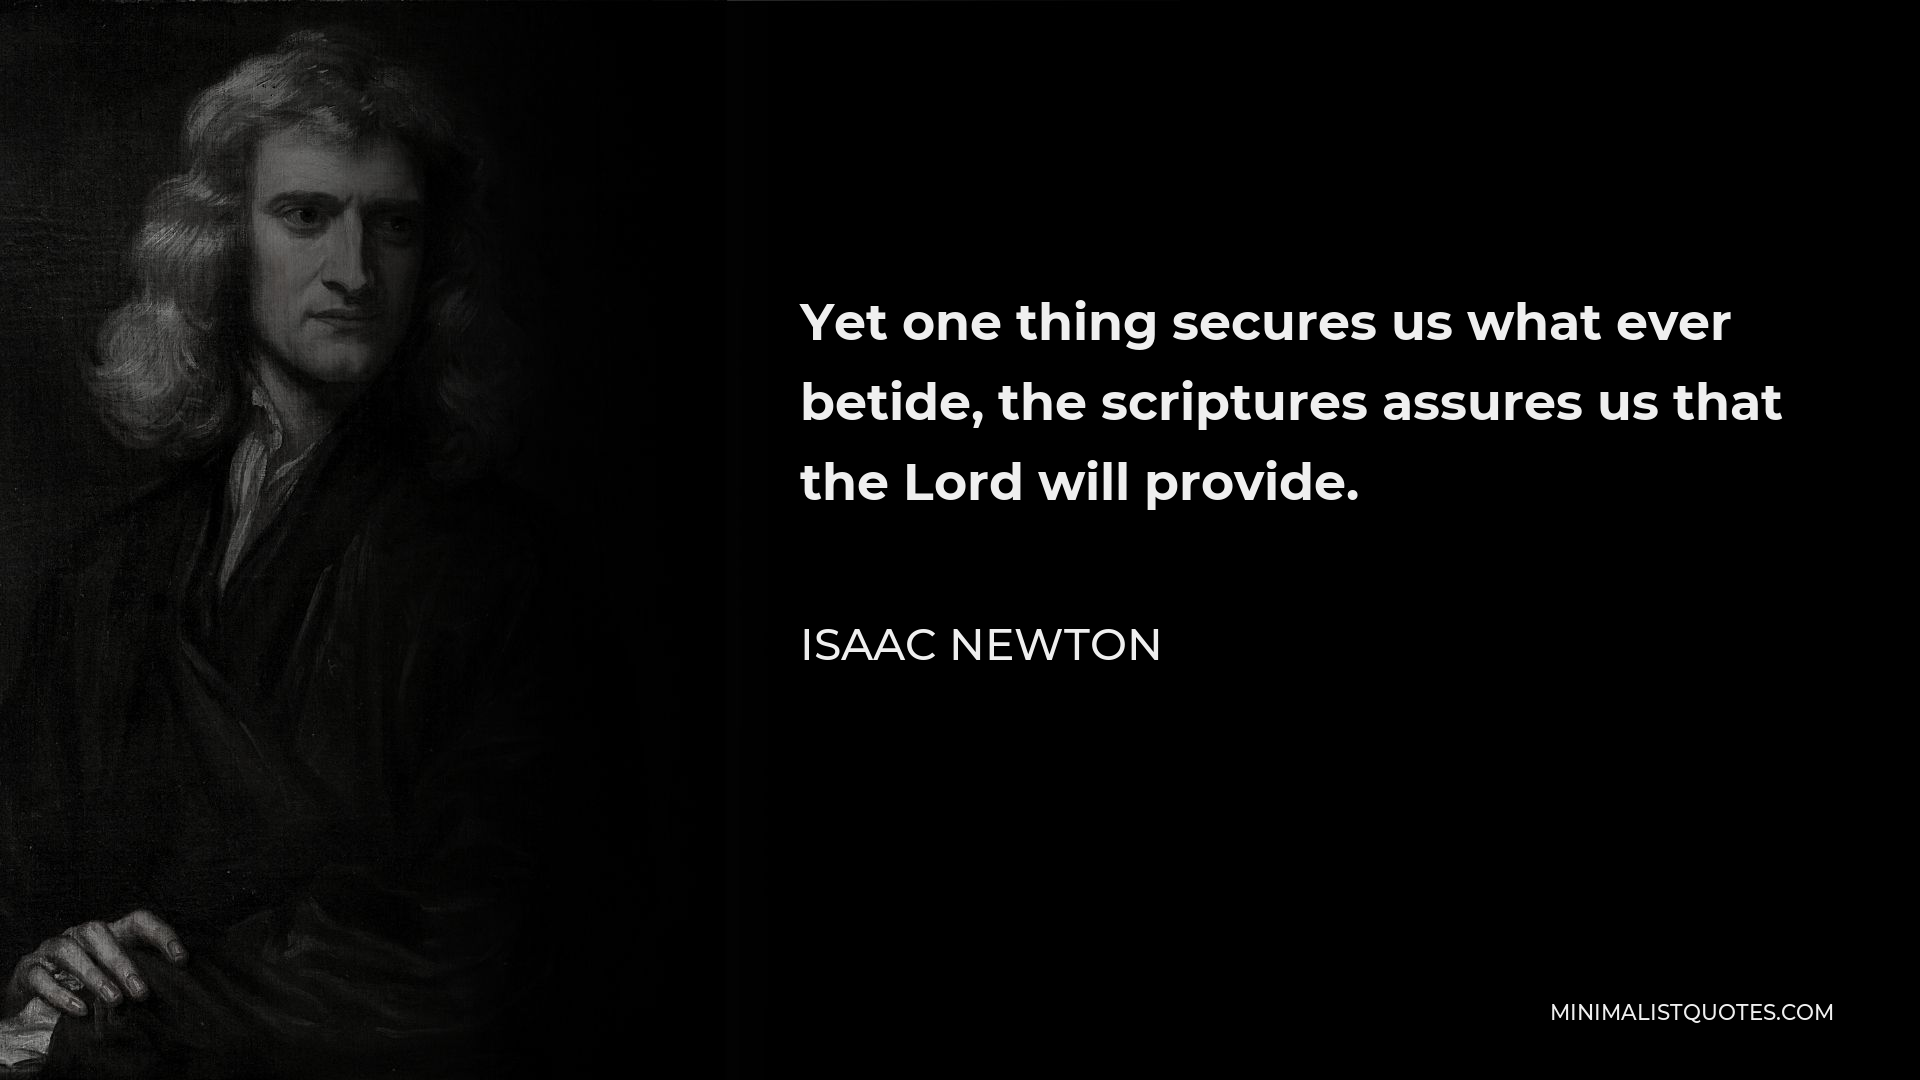 Isaac Newton Quote - Yet one thing secures us what ever betide, the scriptures assures us that the Lord will provide.